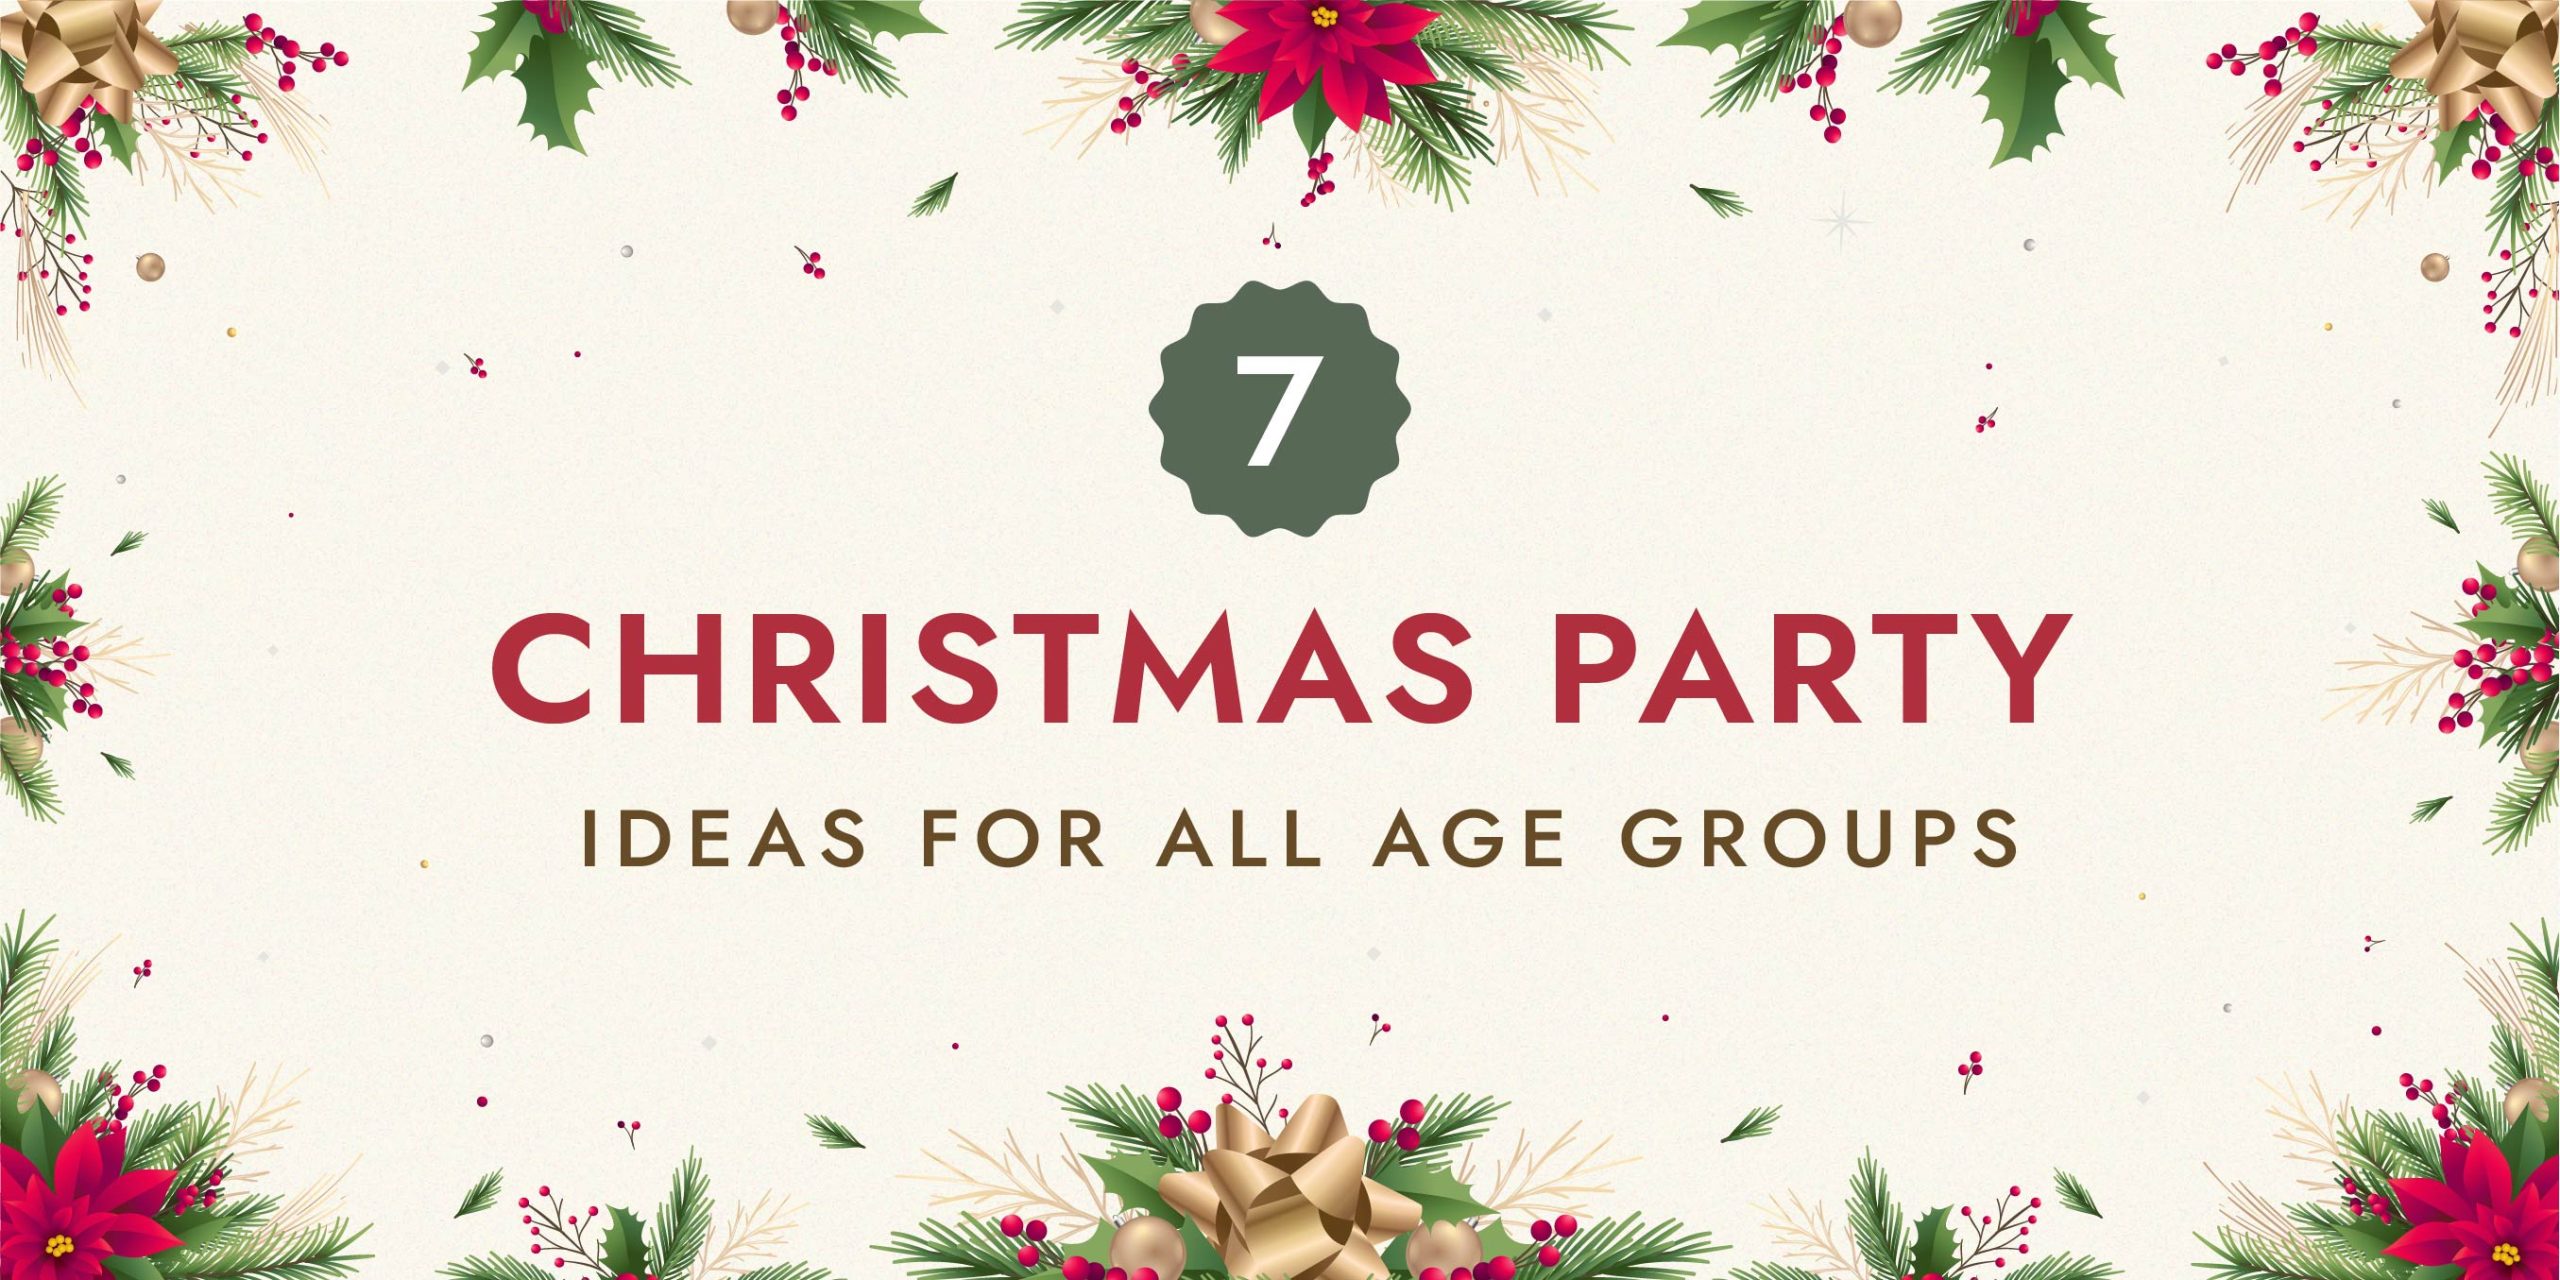 Christmas Party Ideas For All Age Groups